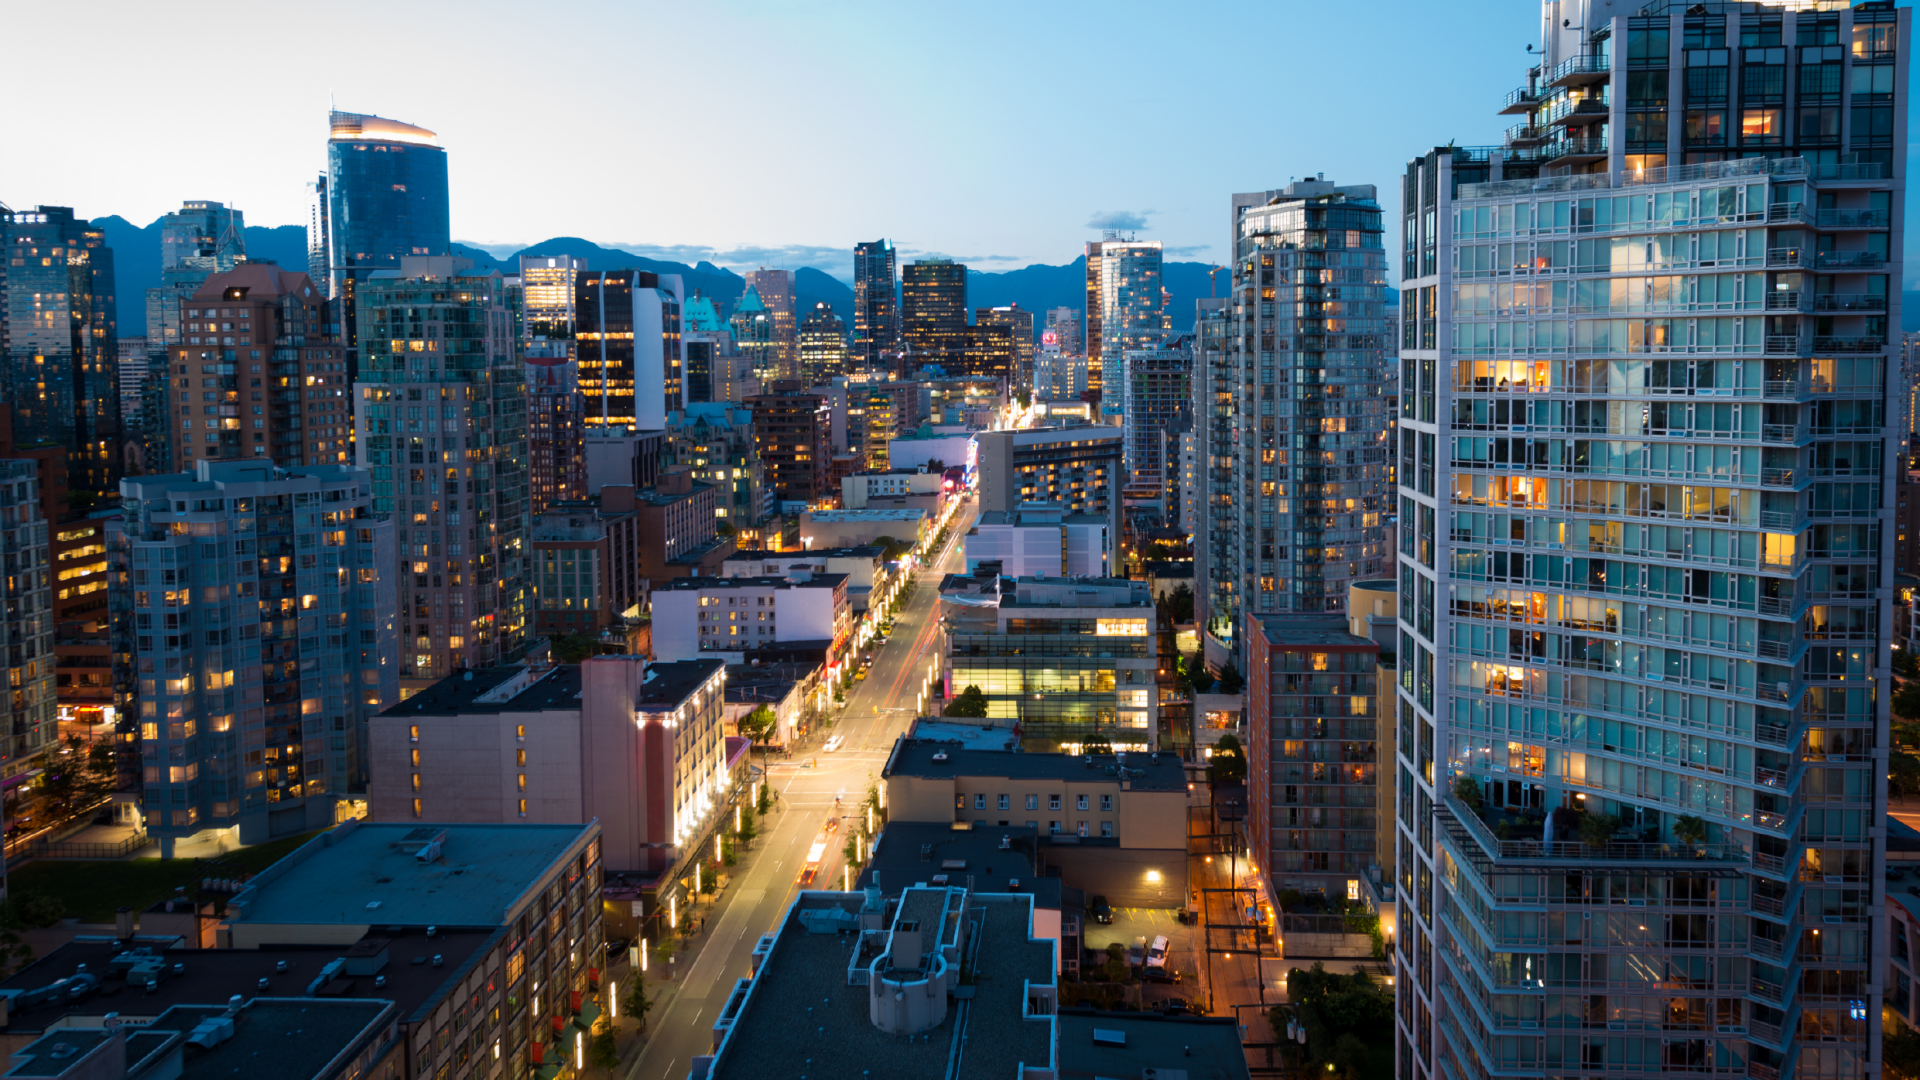 Condo buildings in the city of Vancouver